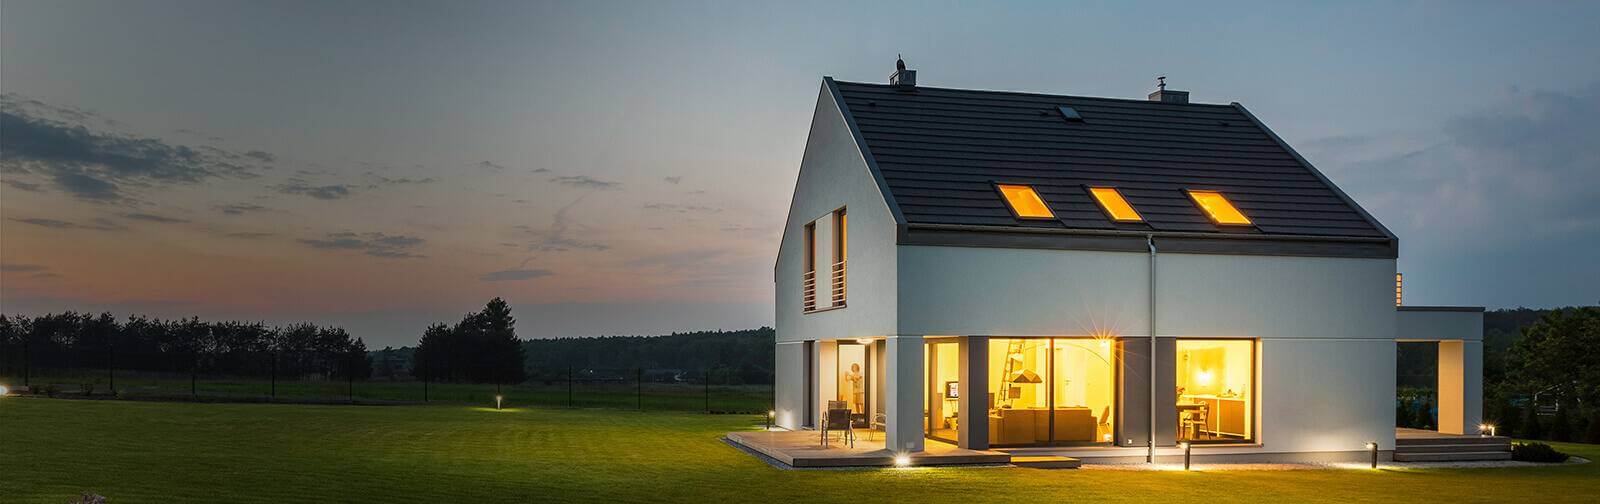 Modern home lit up by interior lights in fading light outside